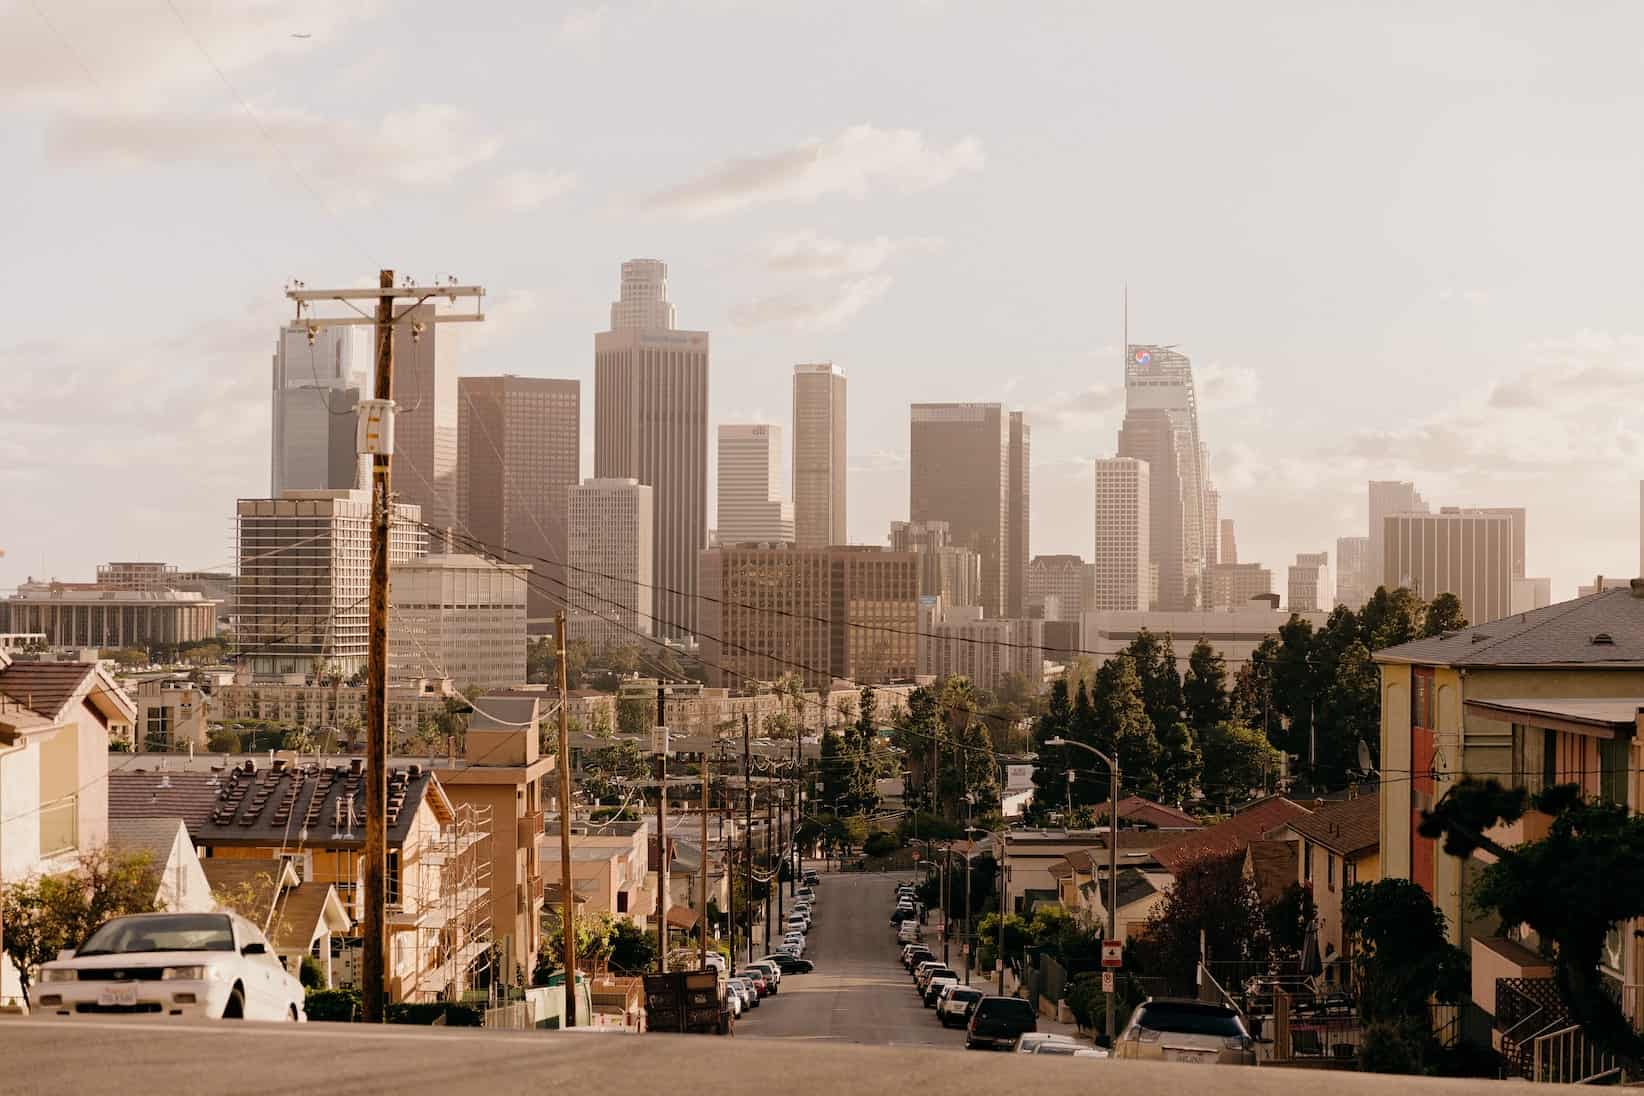 Los Angeles - tenant rights in California